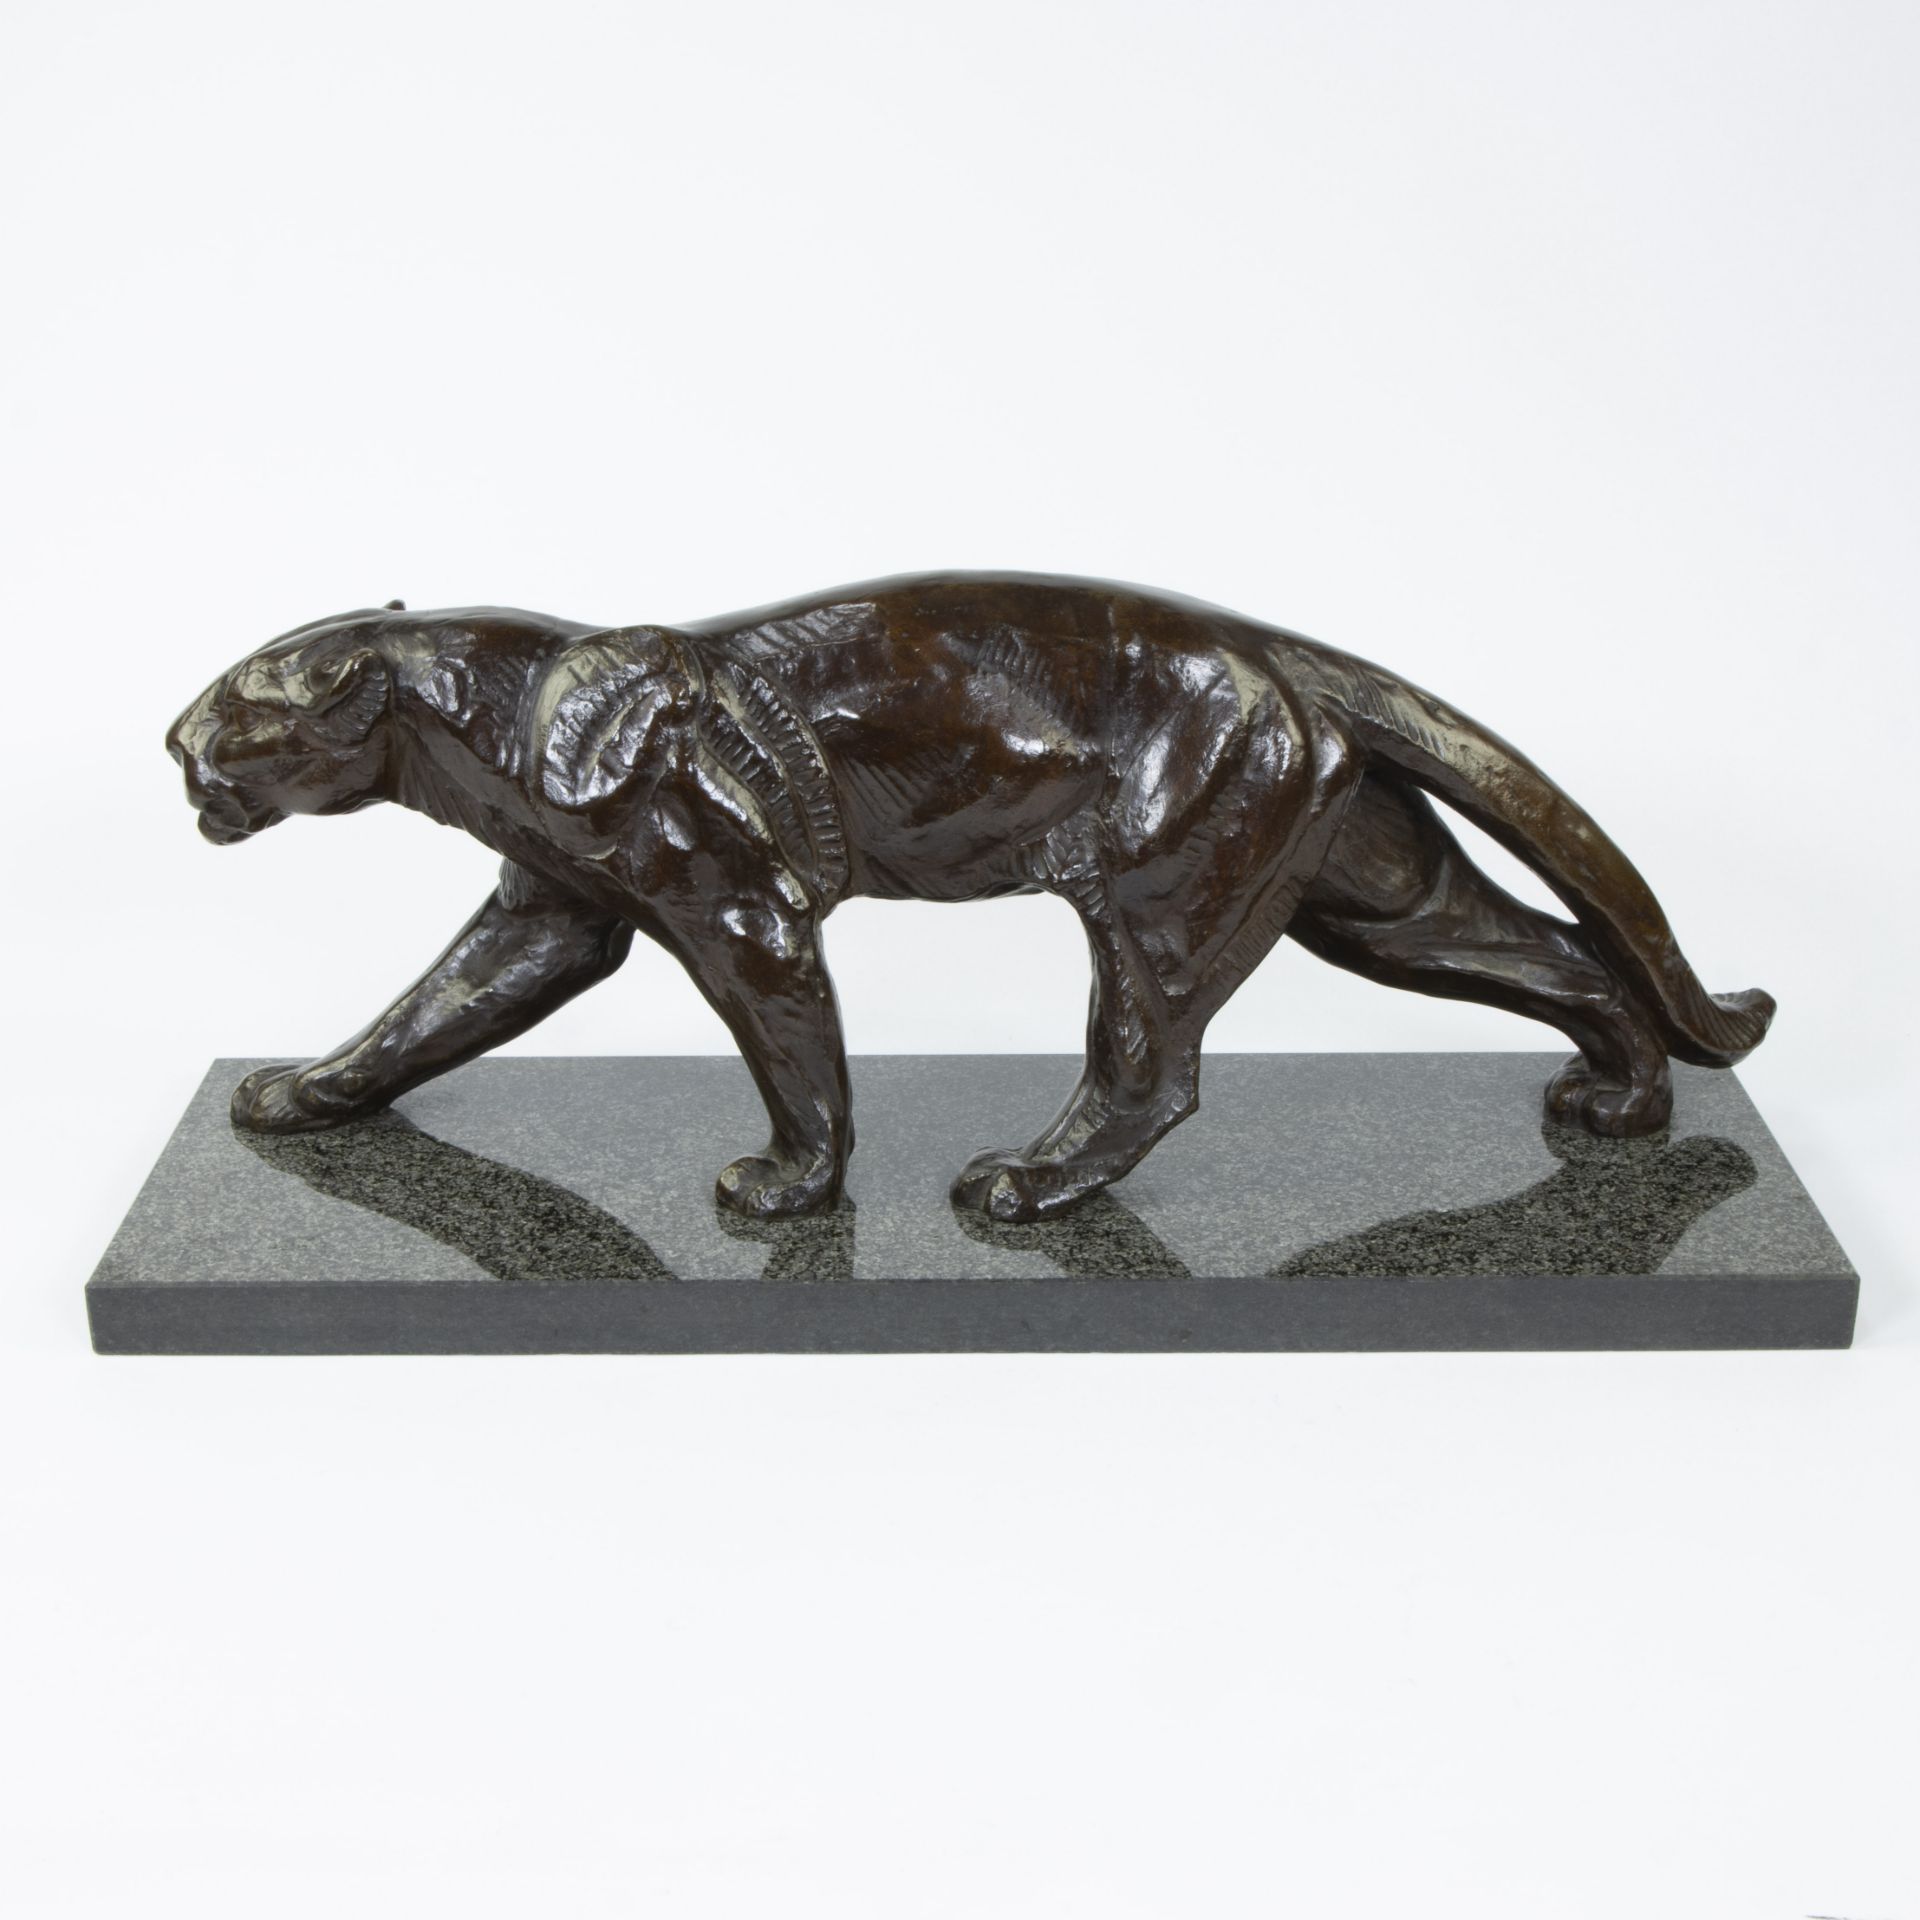 Bronze Art Deco panther on marble base, circa 1930s - Image 2 of 5